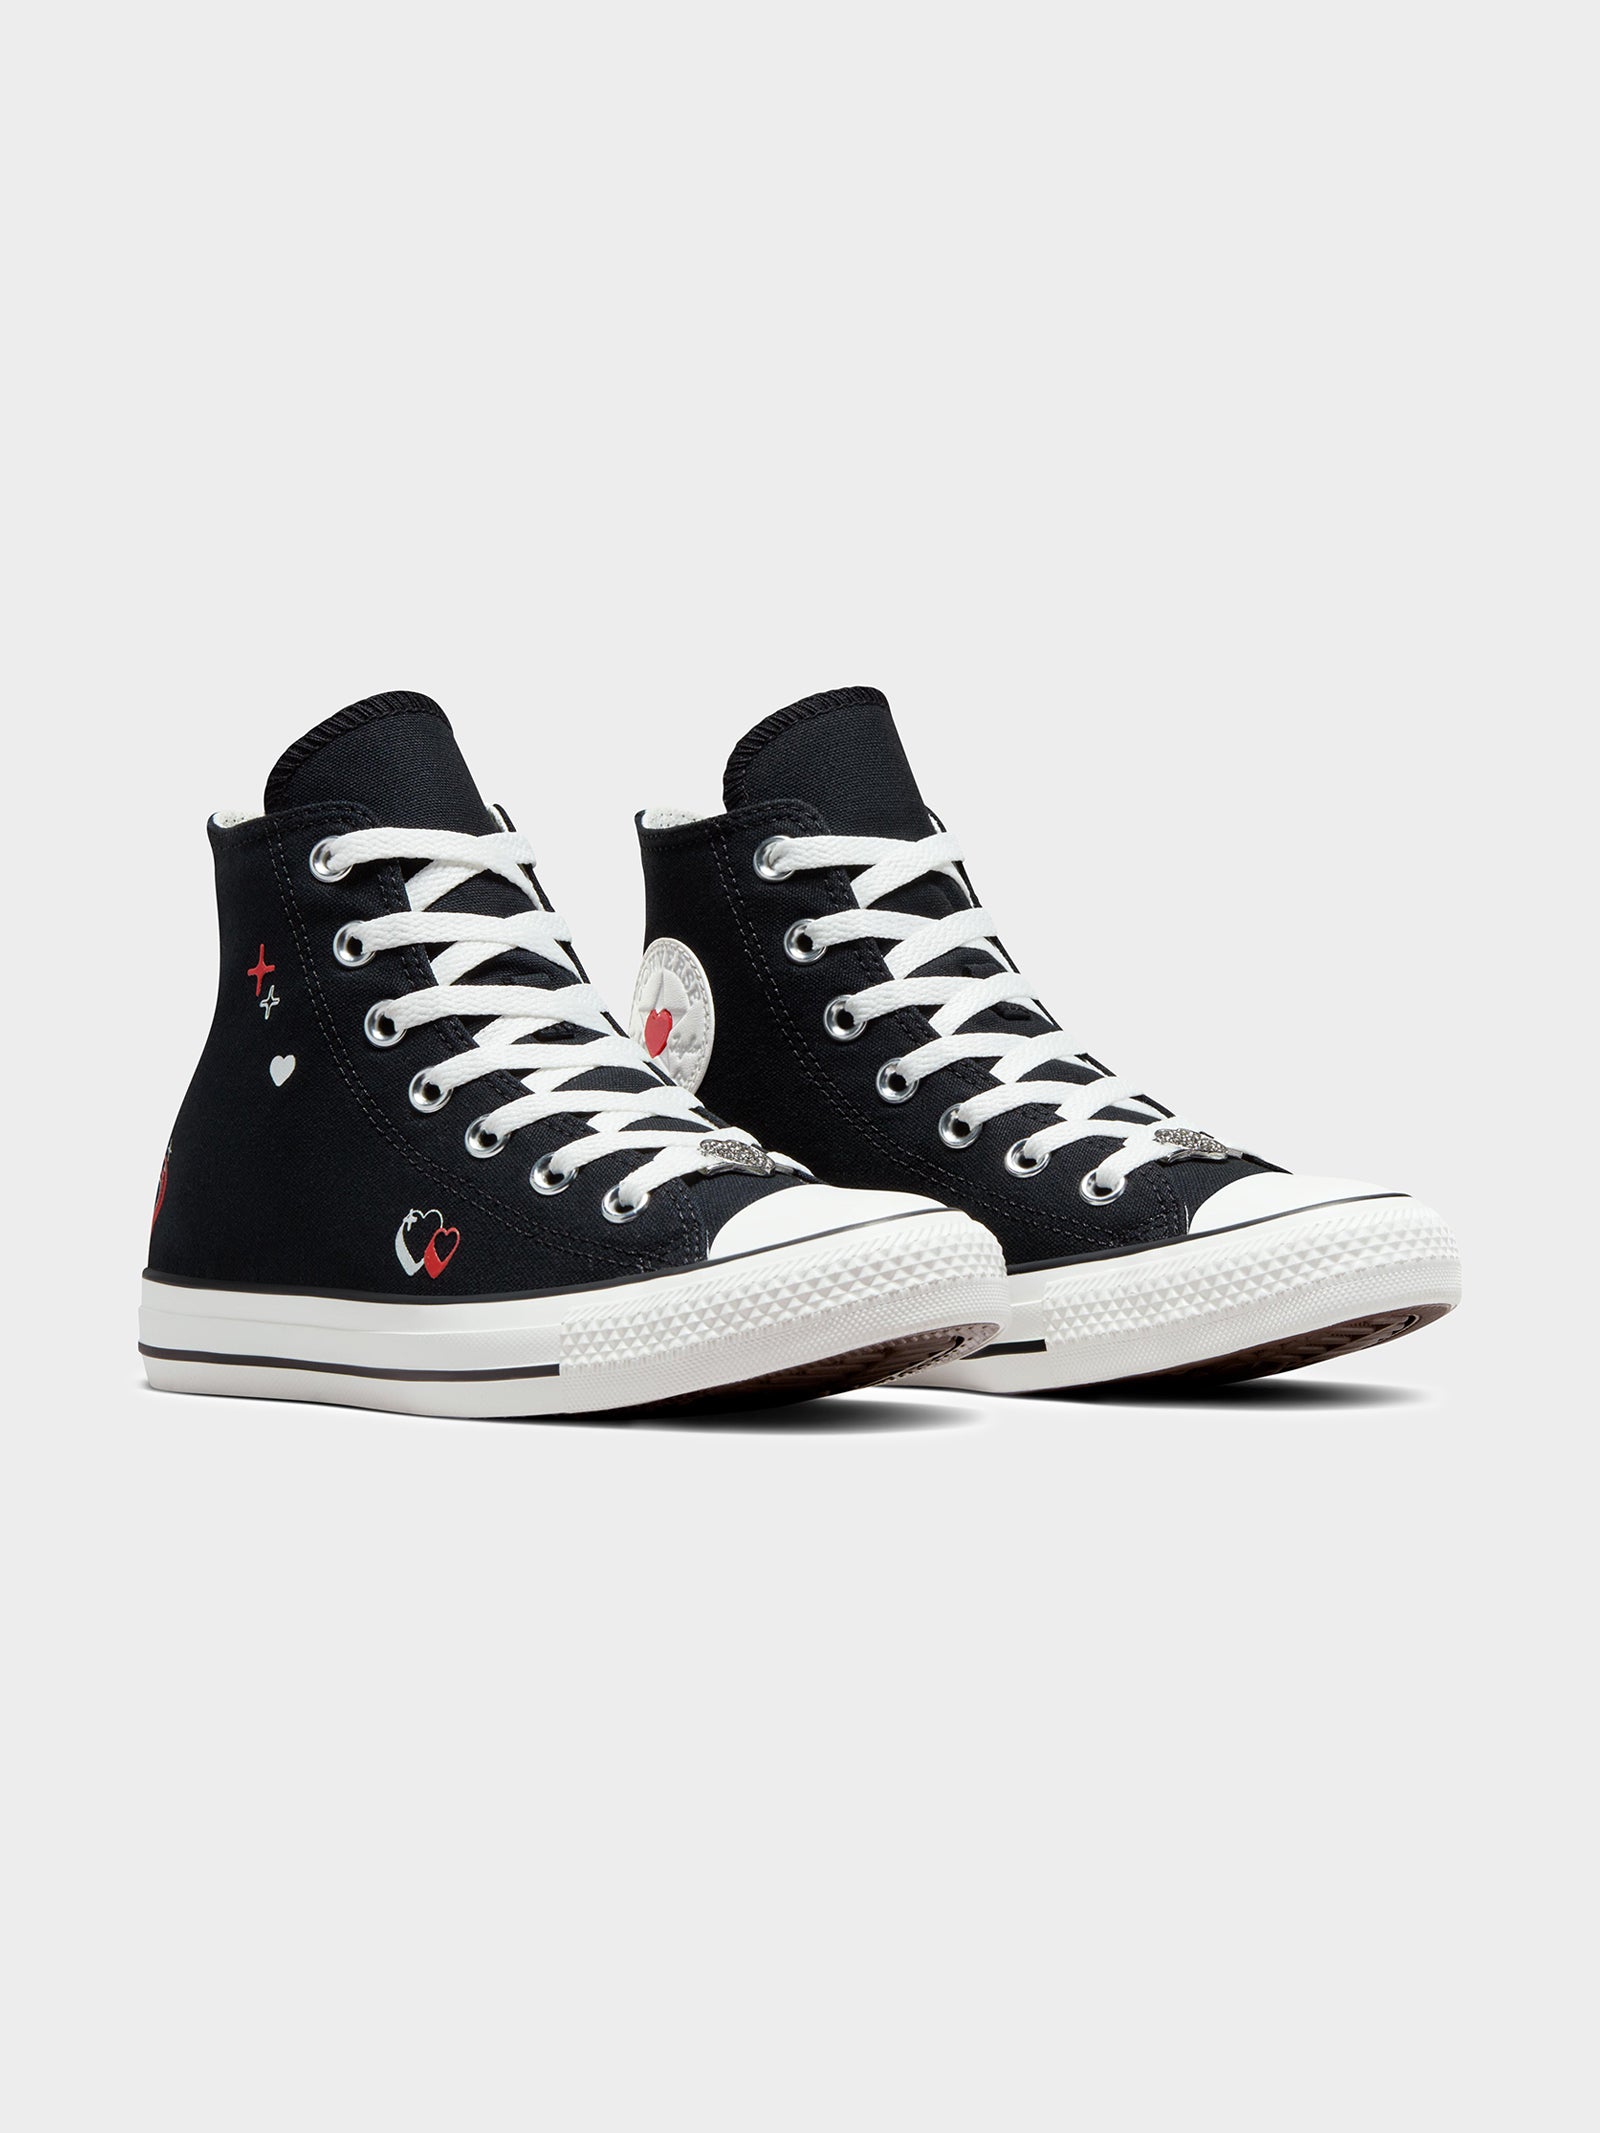 Womens Chuck Taylor All Star Y2K Heart High Top Sneakers in Black